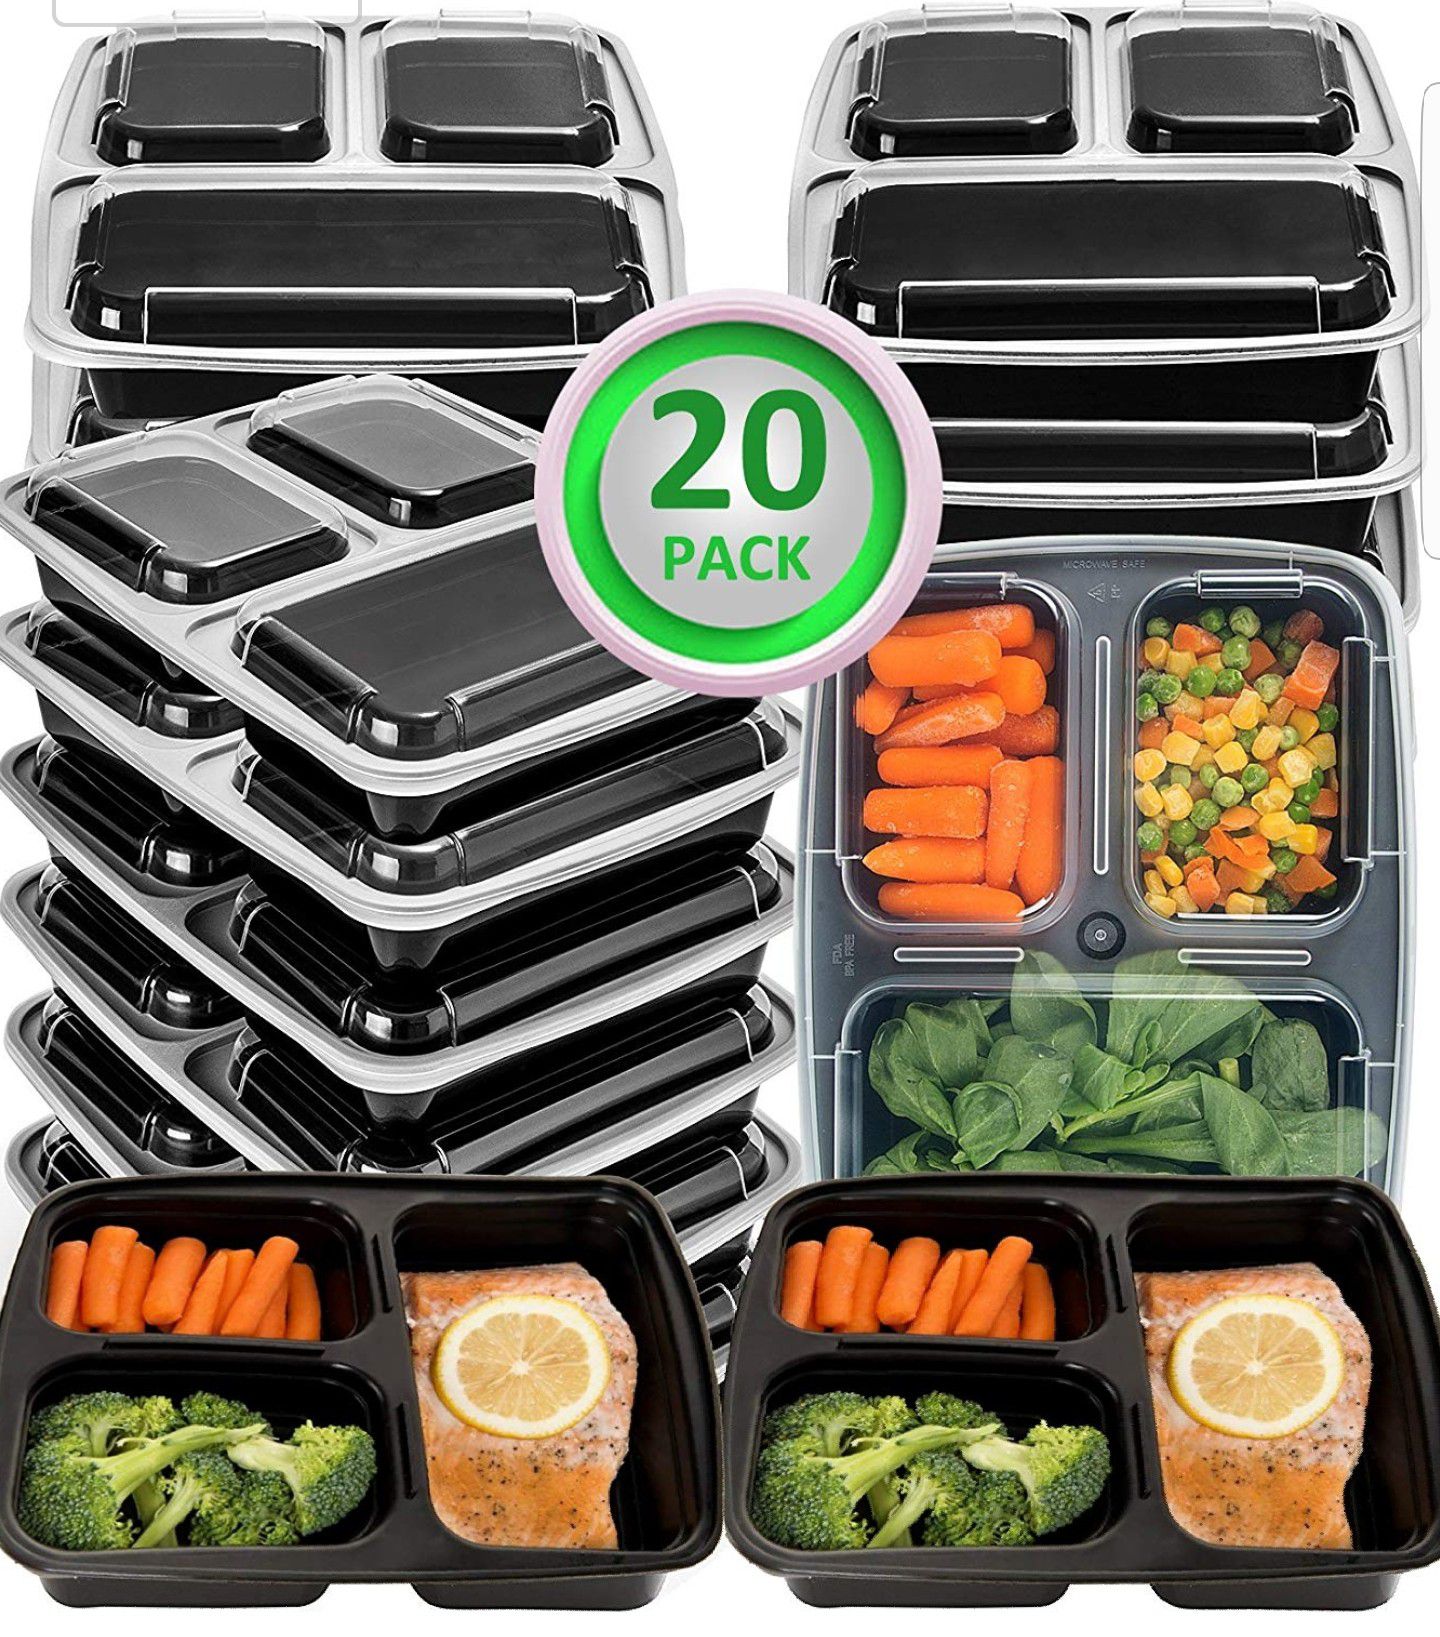 20 Pack Meal Prep Containers 2 and 3 Compartment Bento & Mealcon Microwave Dishwasher Freezer Safe Food Storage Containers with lids-Portion Control